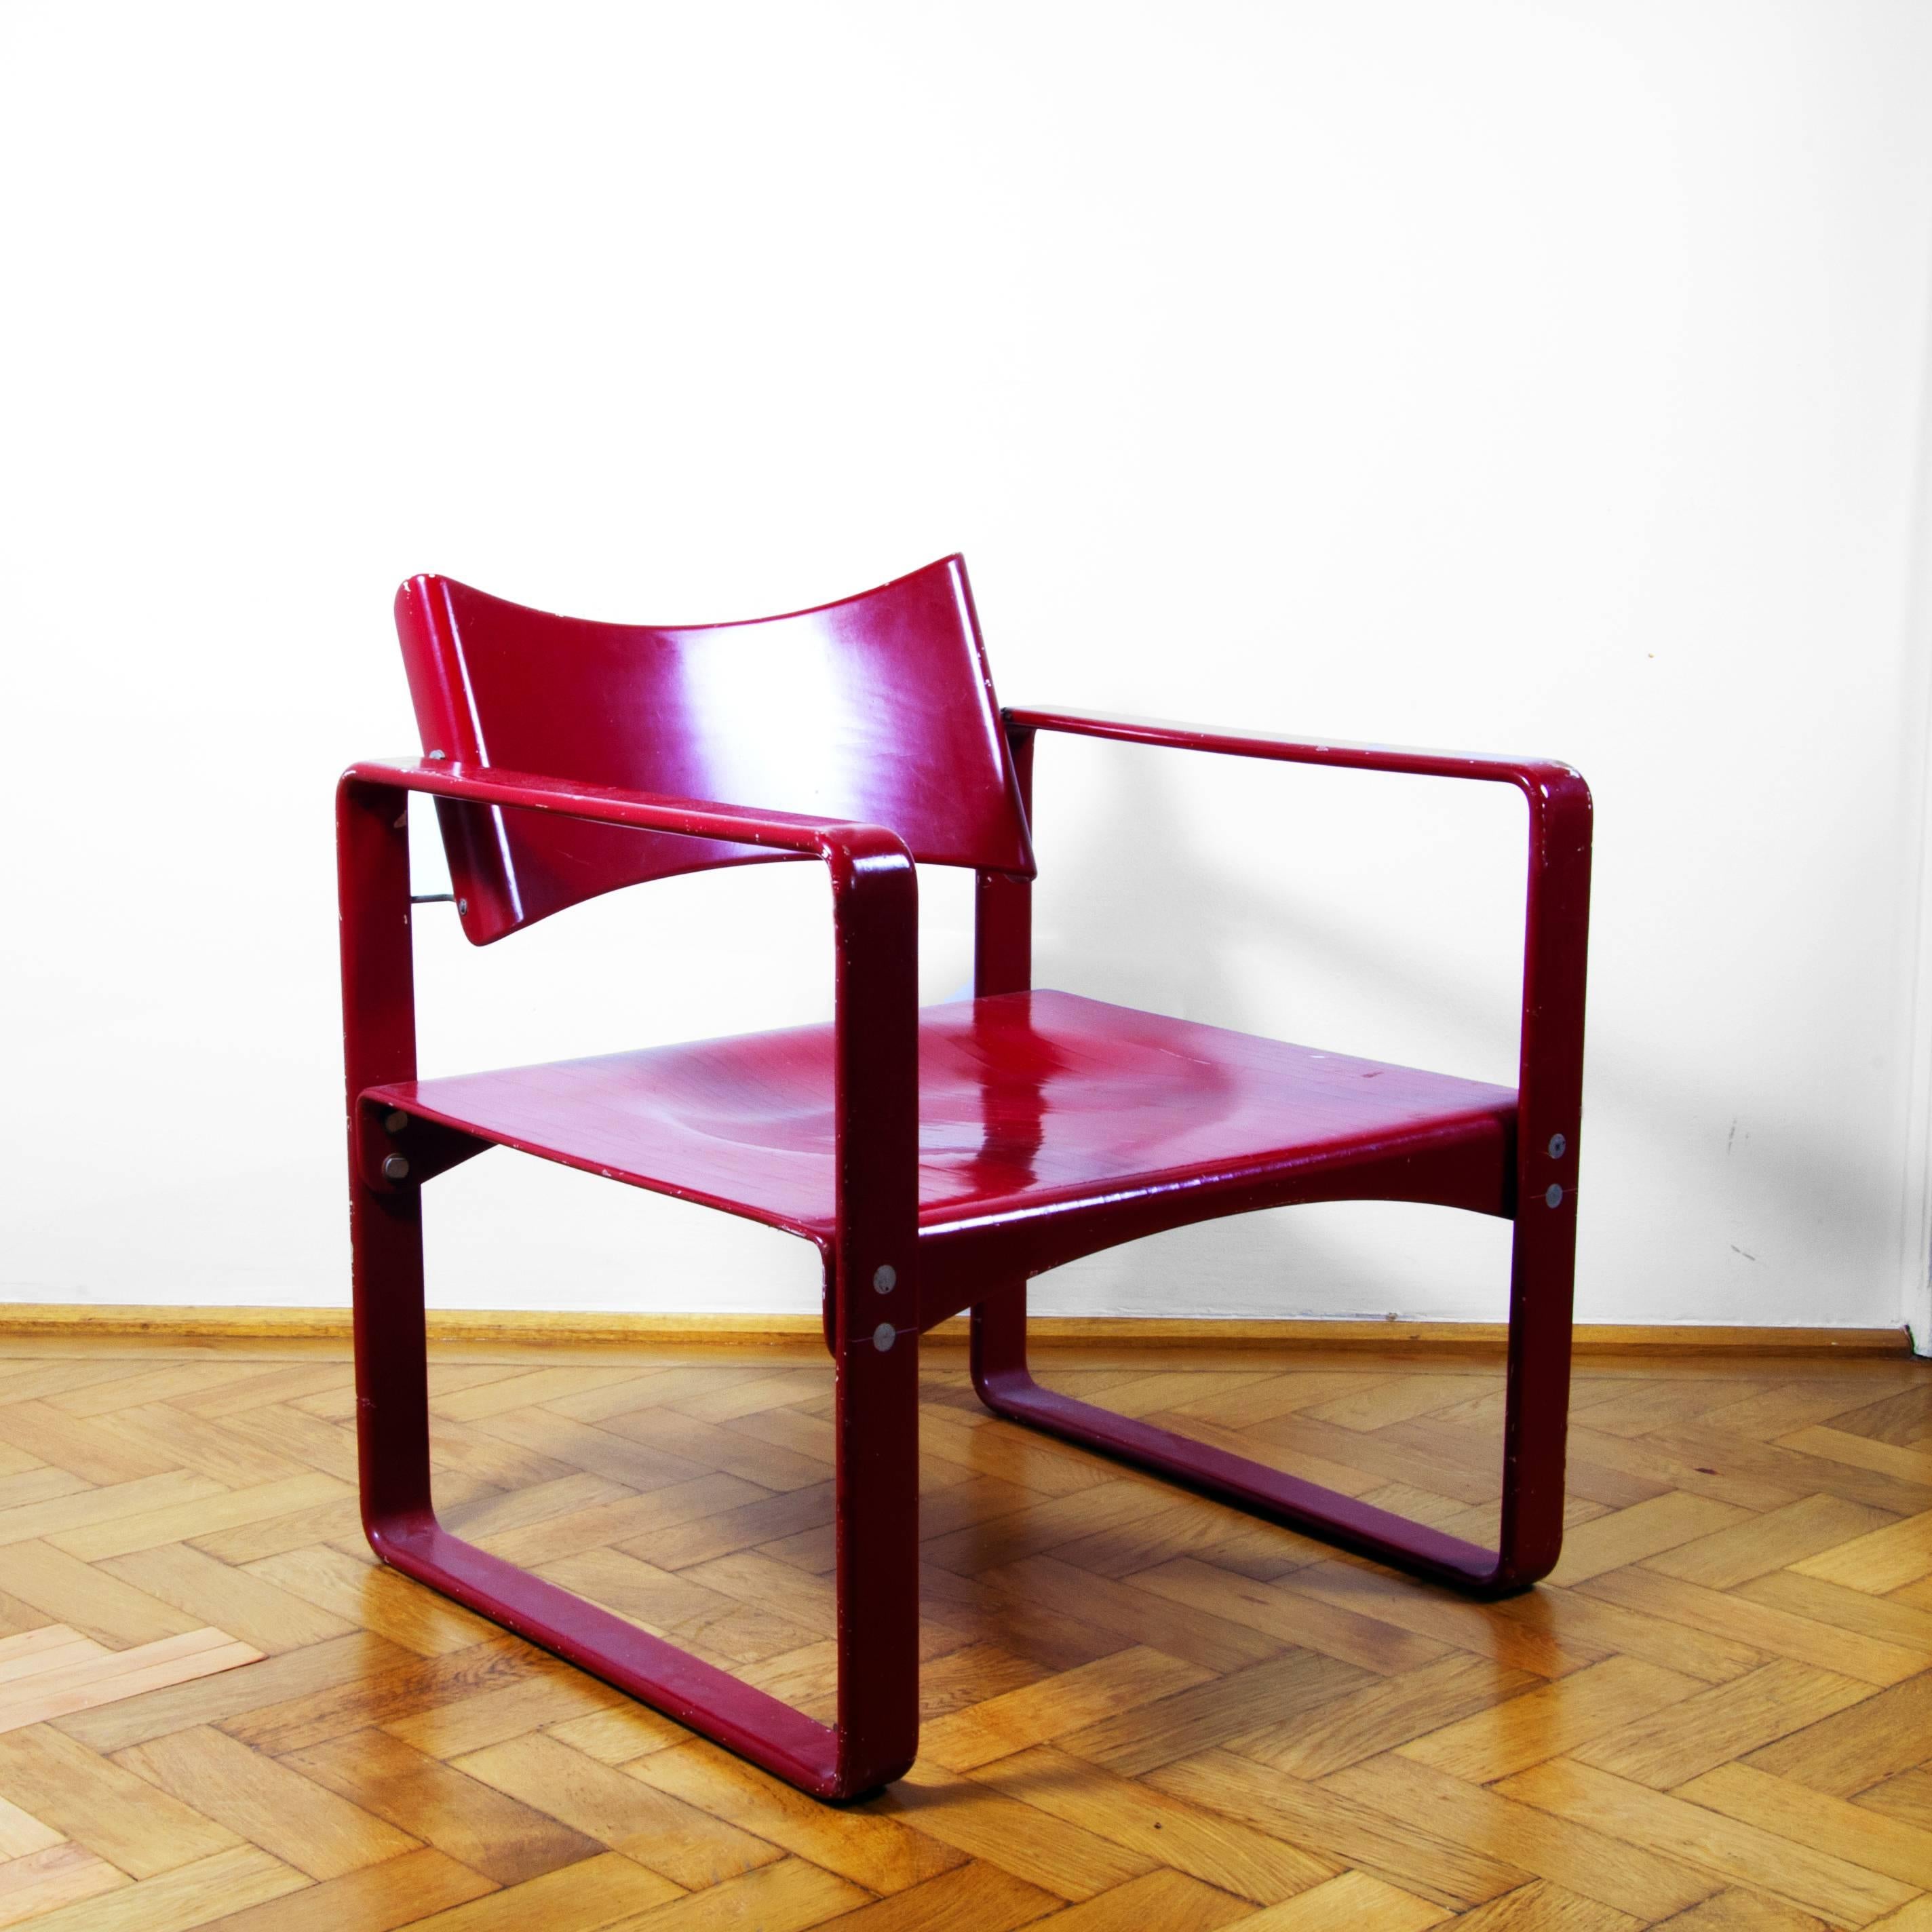 Lacquered Verner Panton Lounge Chair Thonet Mod. 270 Designed 1966, Mid-Century Modern For Sale